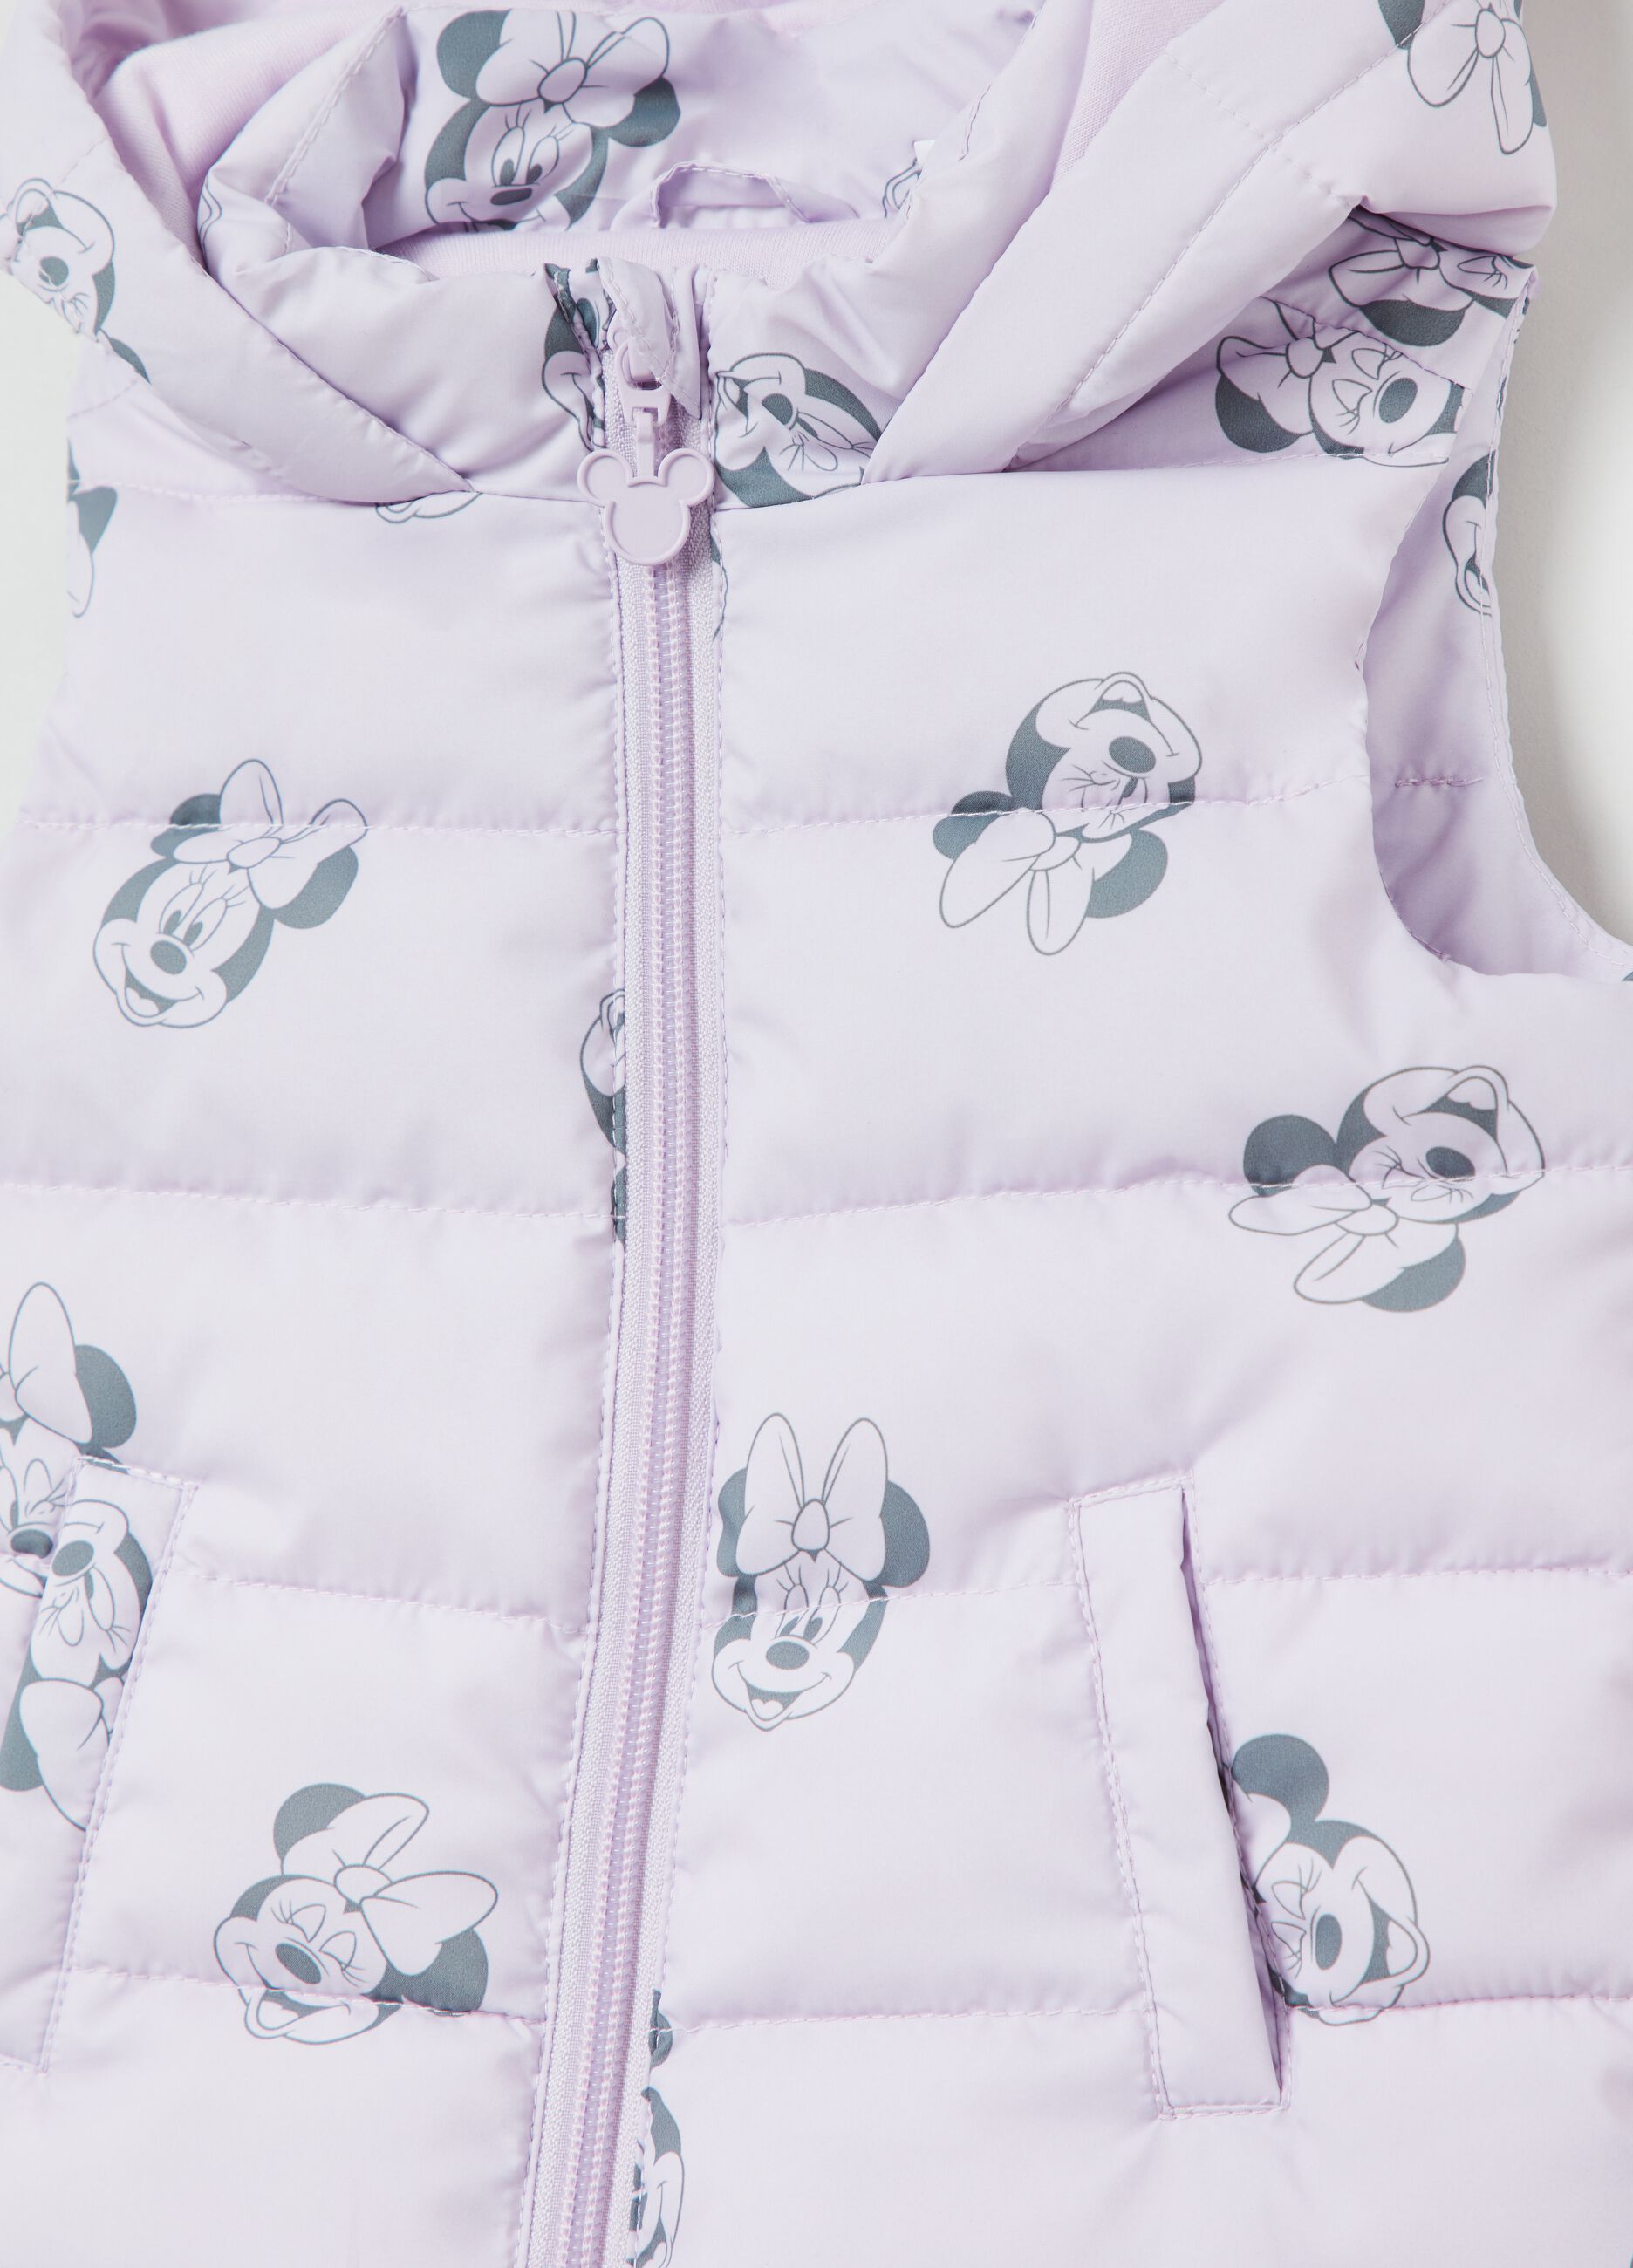 Full-zip gilet with Disney Baby Minnie Mouse print.